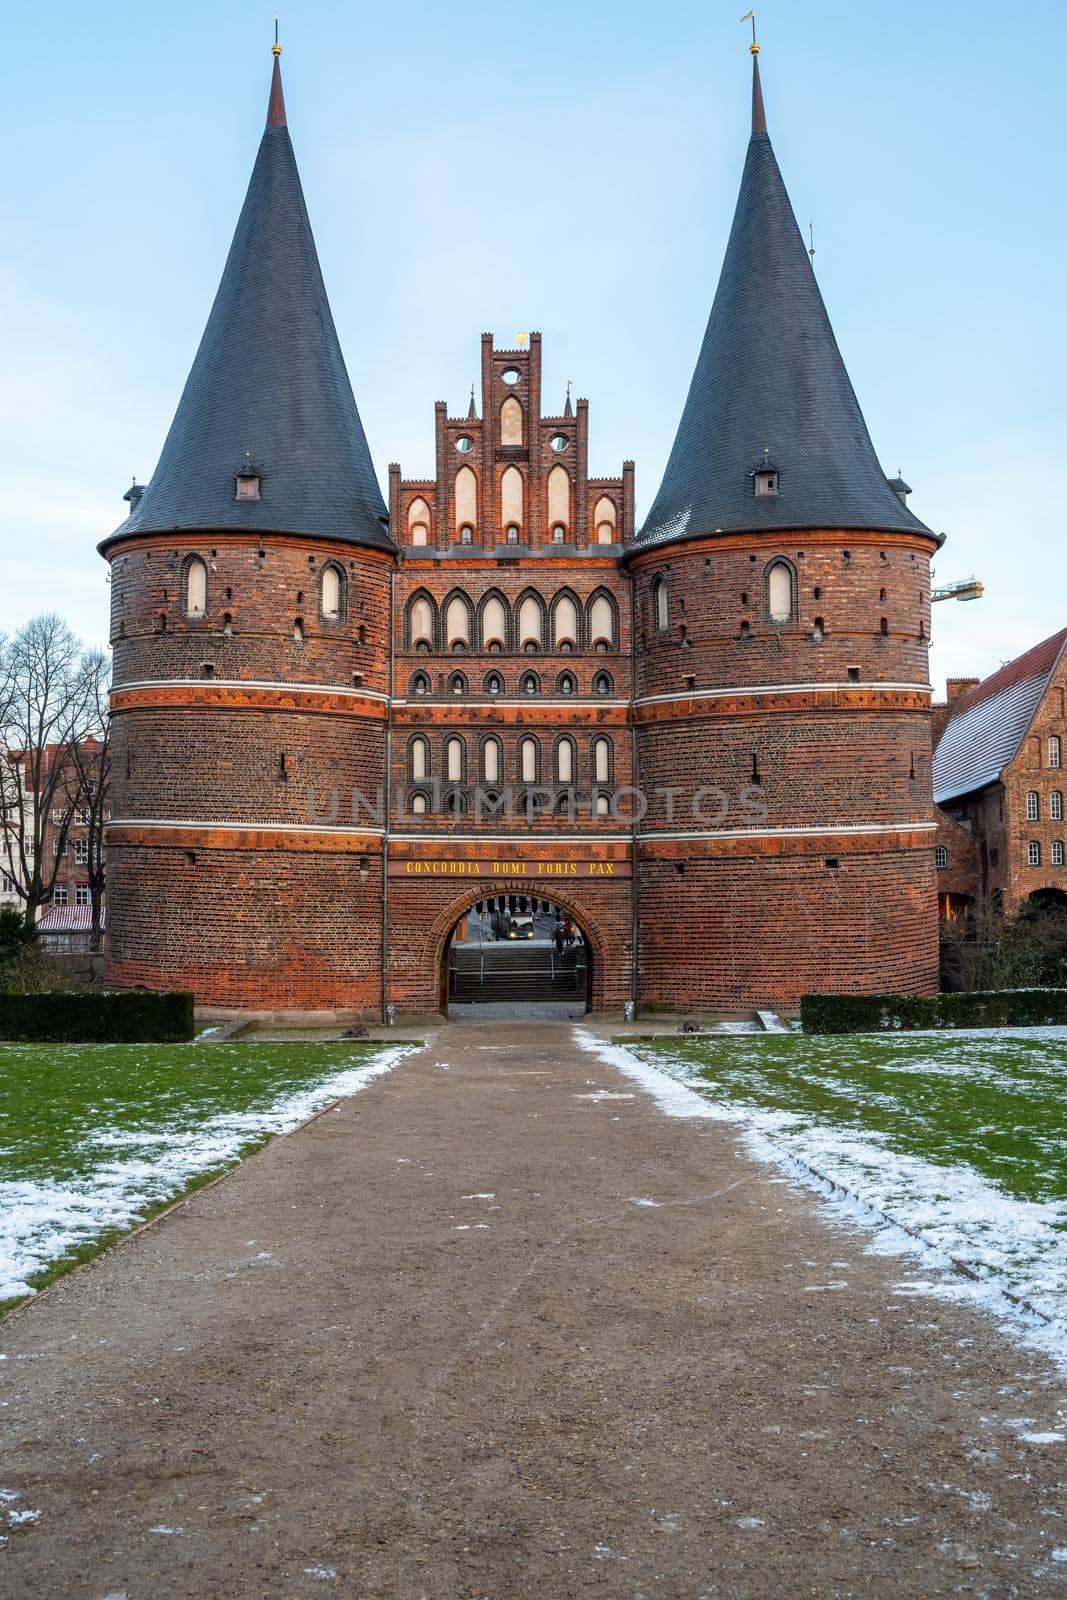 The historic Holsten Gate in Luebeck, Germany